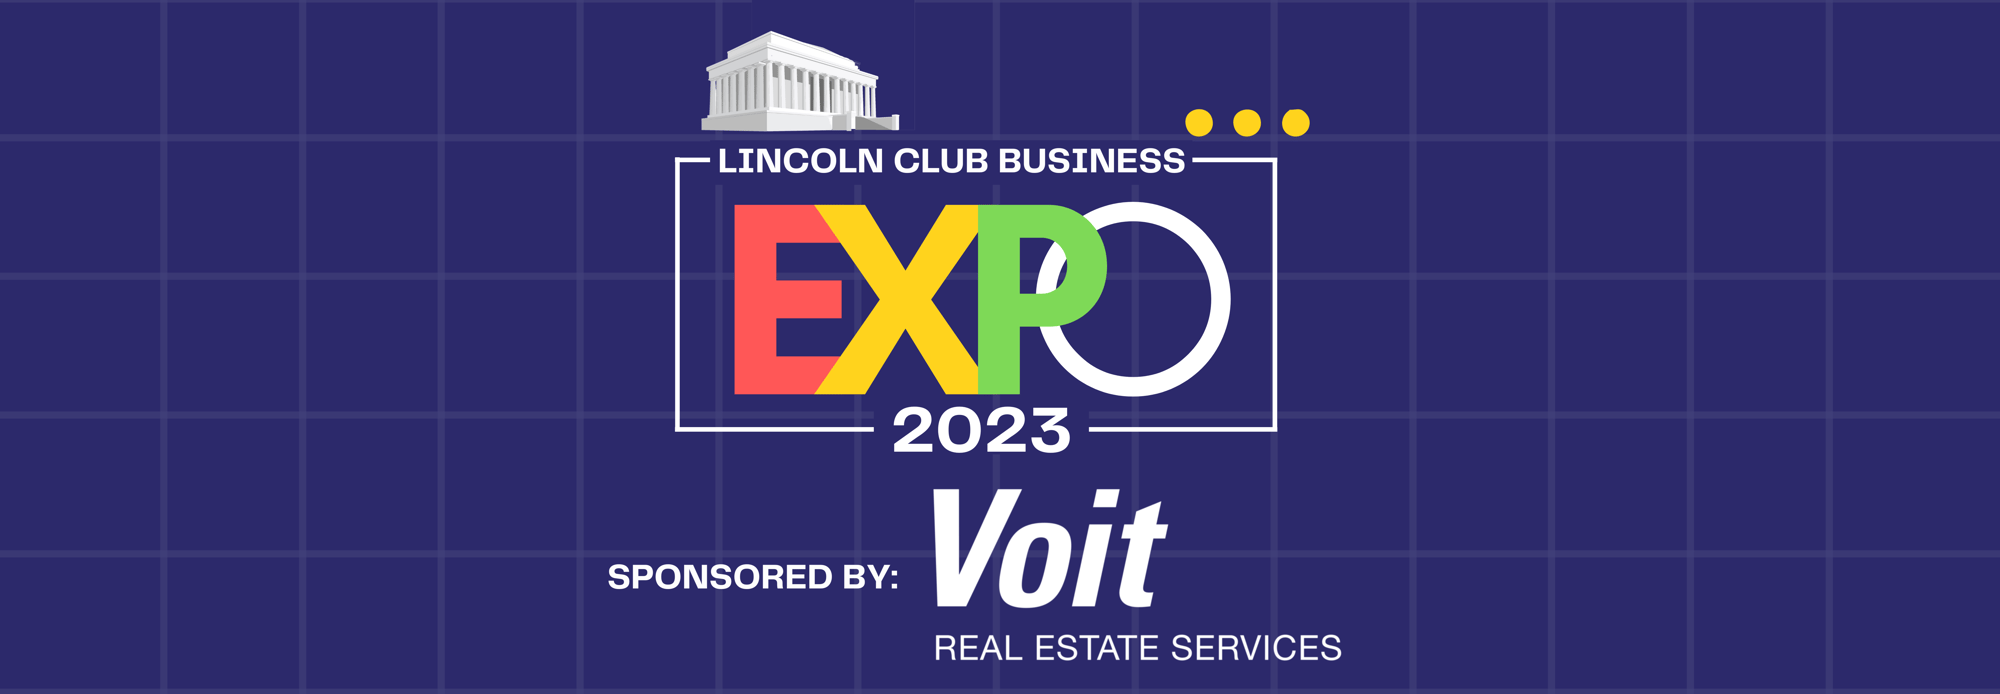 Lincoln Club Business Expo 2023 Banner-2